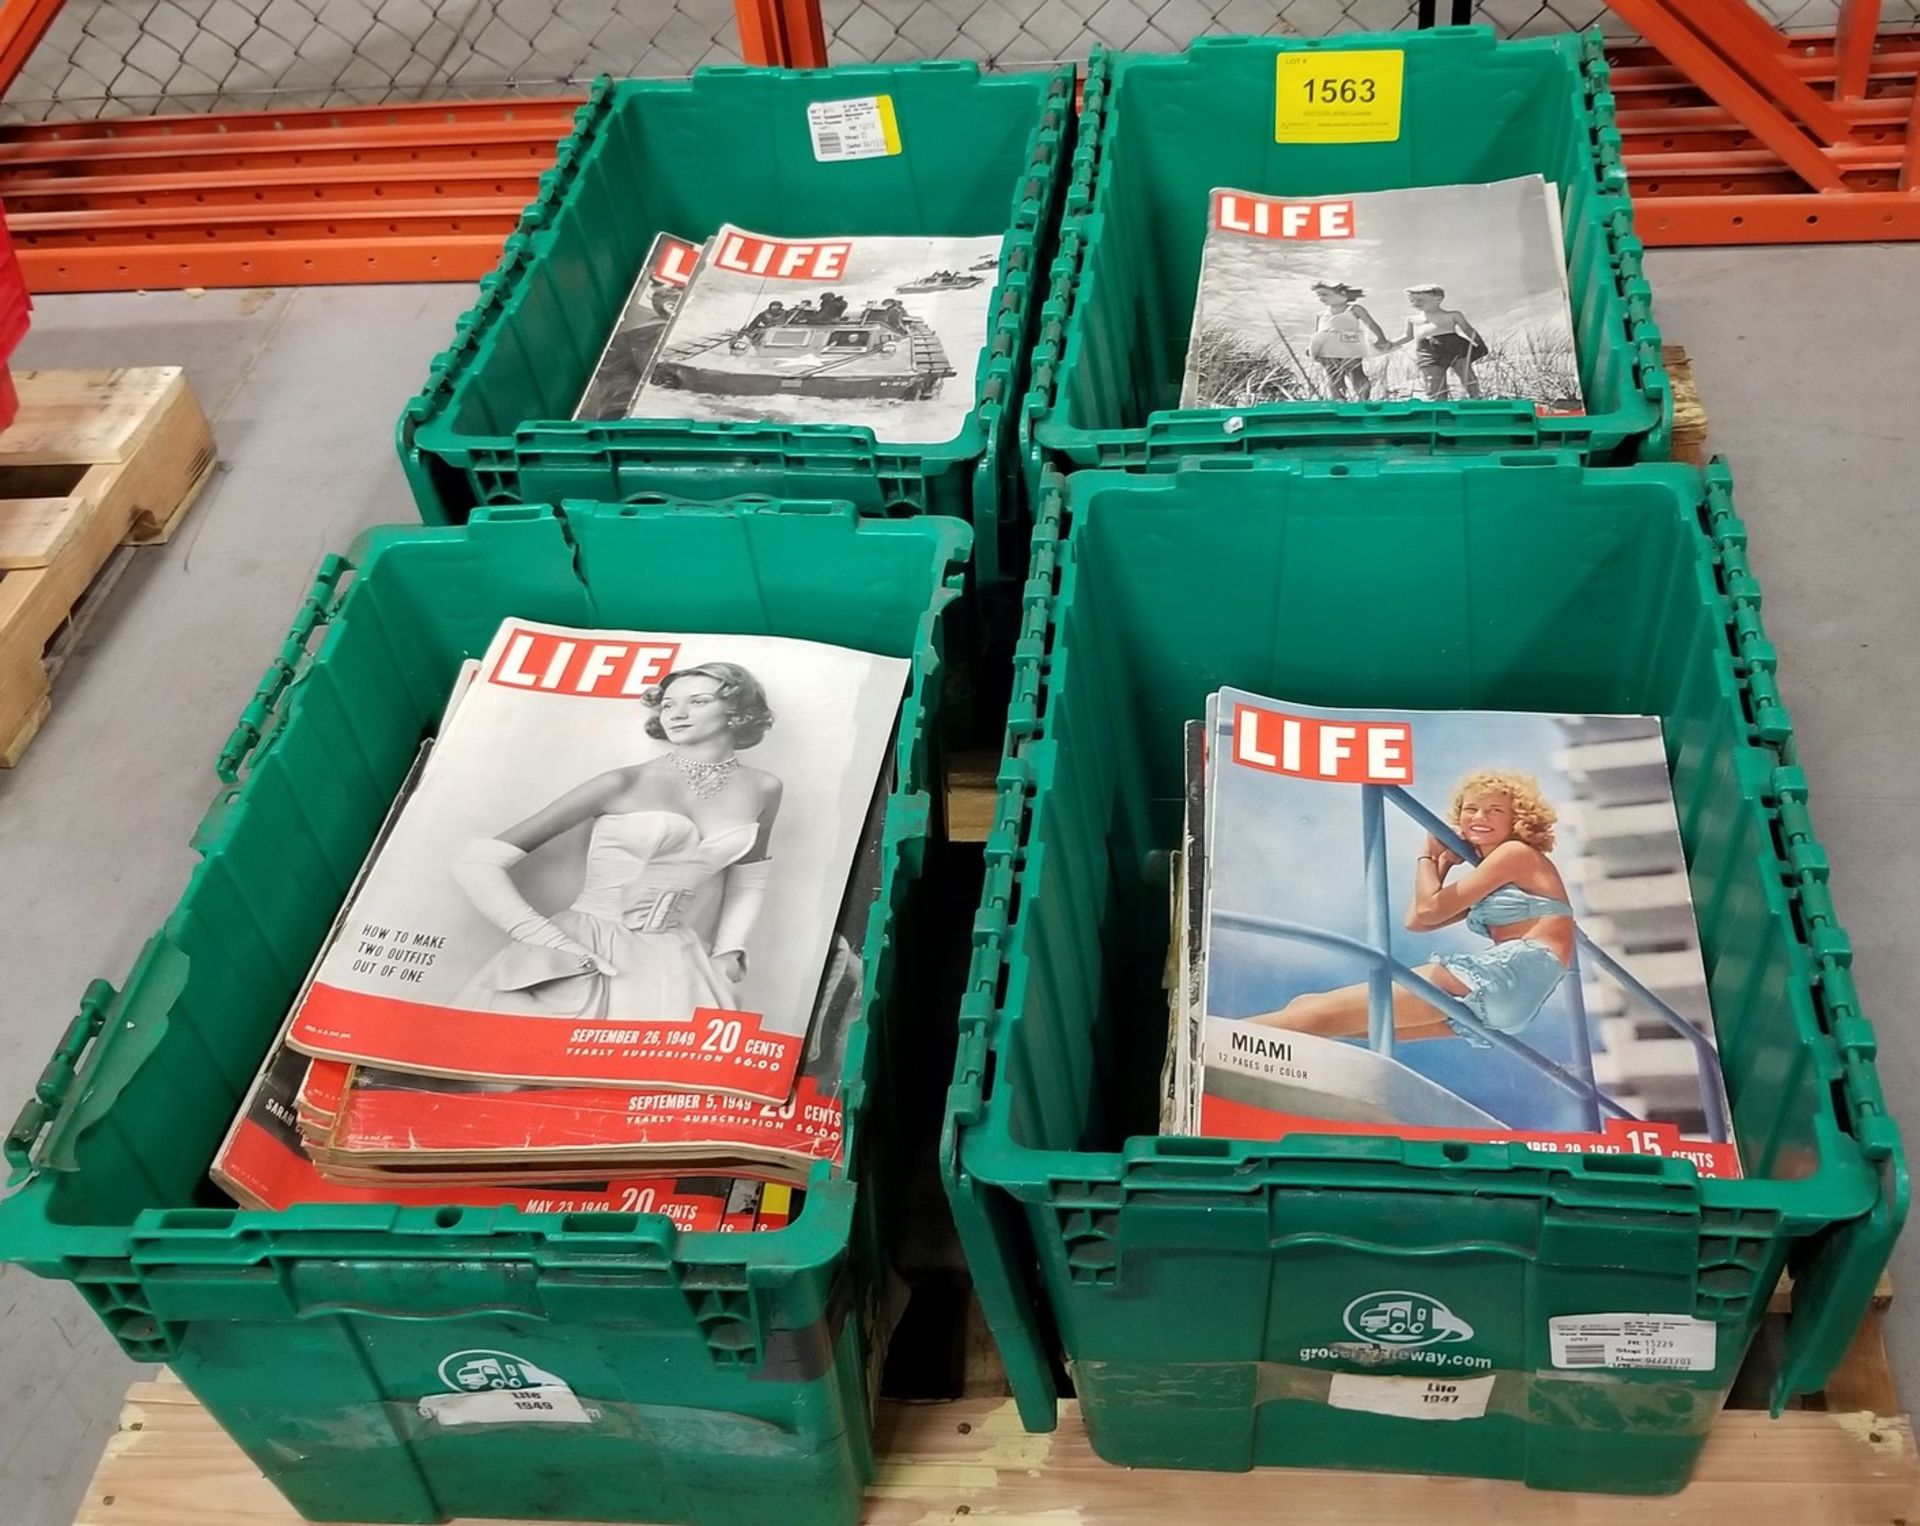 VINTAGE TIME MAGAZINES - APPROX 160 ISSUES - YEARS INDICATED IN PHOTOS - 1944, 1946, 1947, 1949